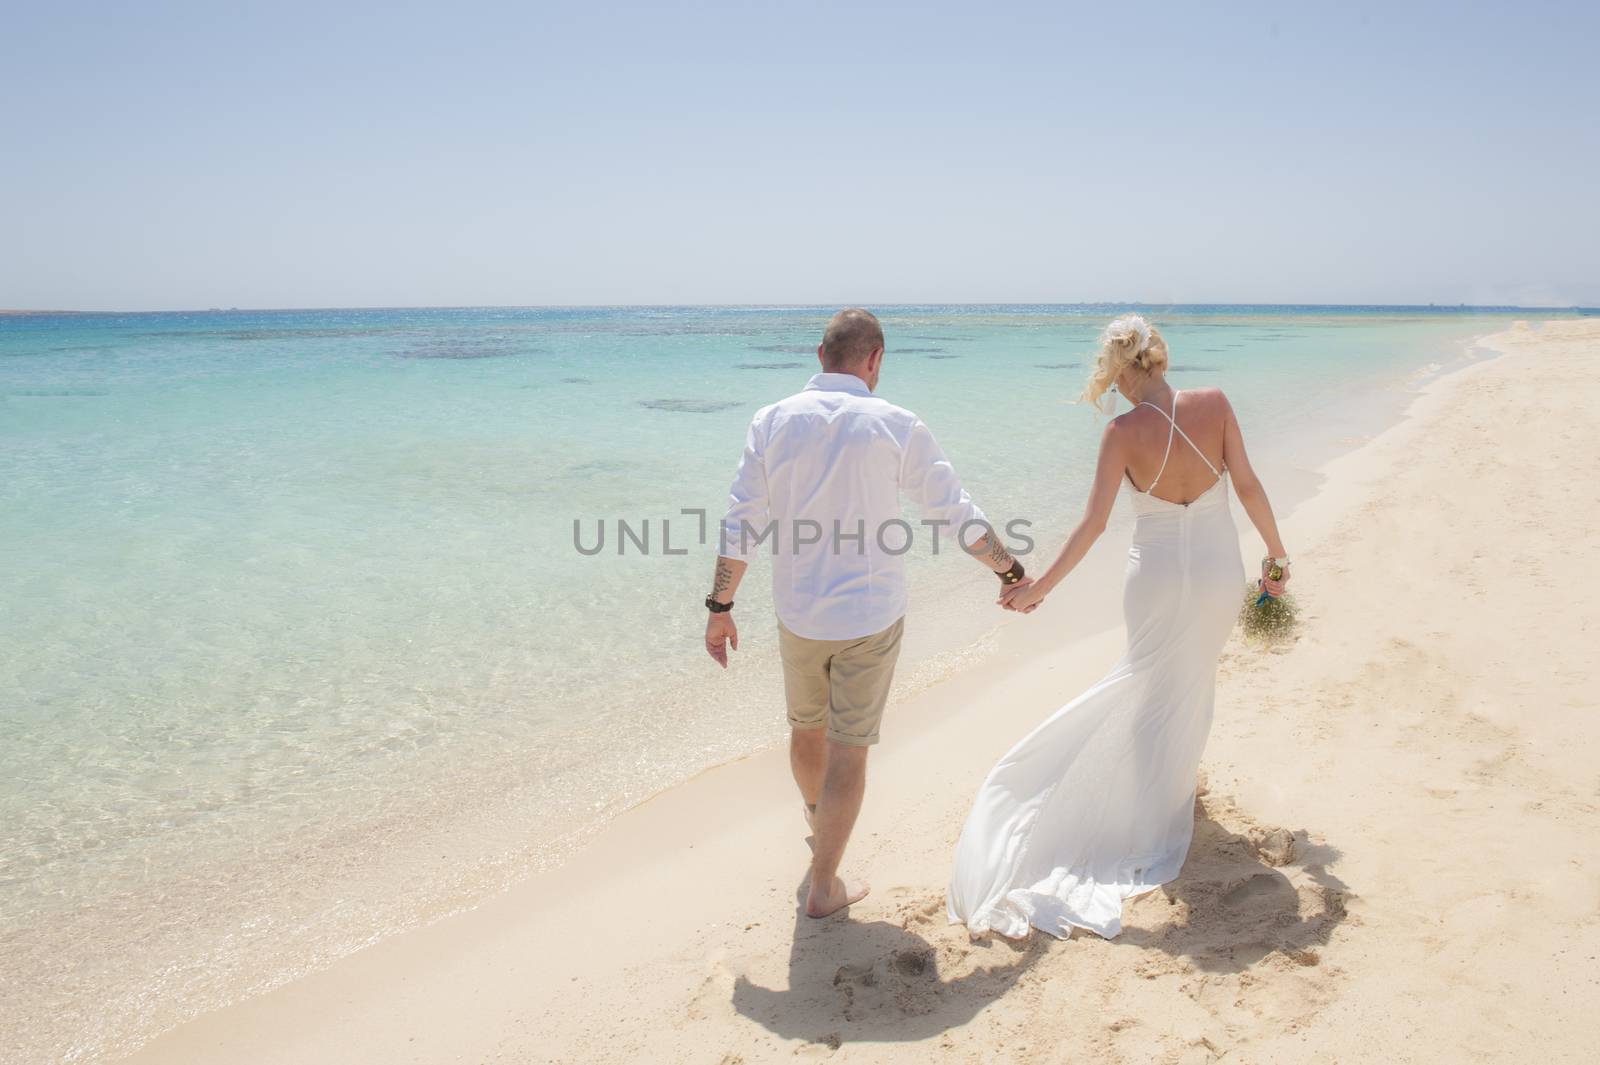 Beautiful couple walking together at a tropical beach paradise on wedding day in white gown dress with ocean view